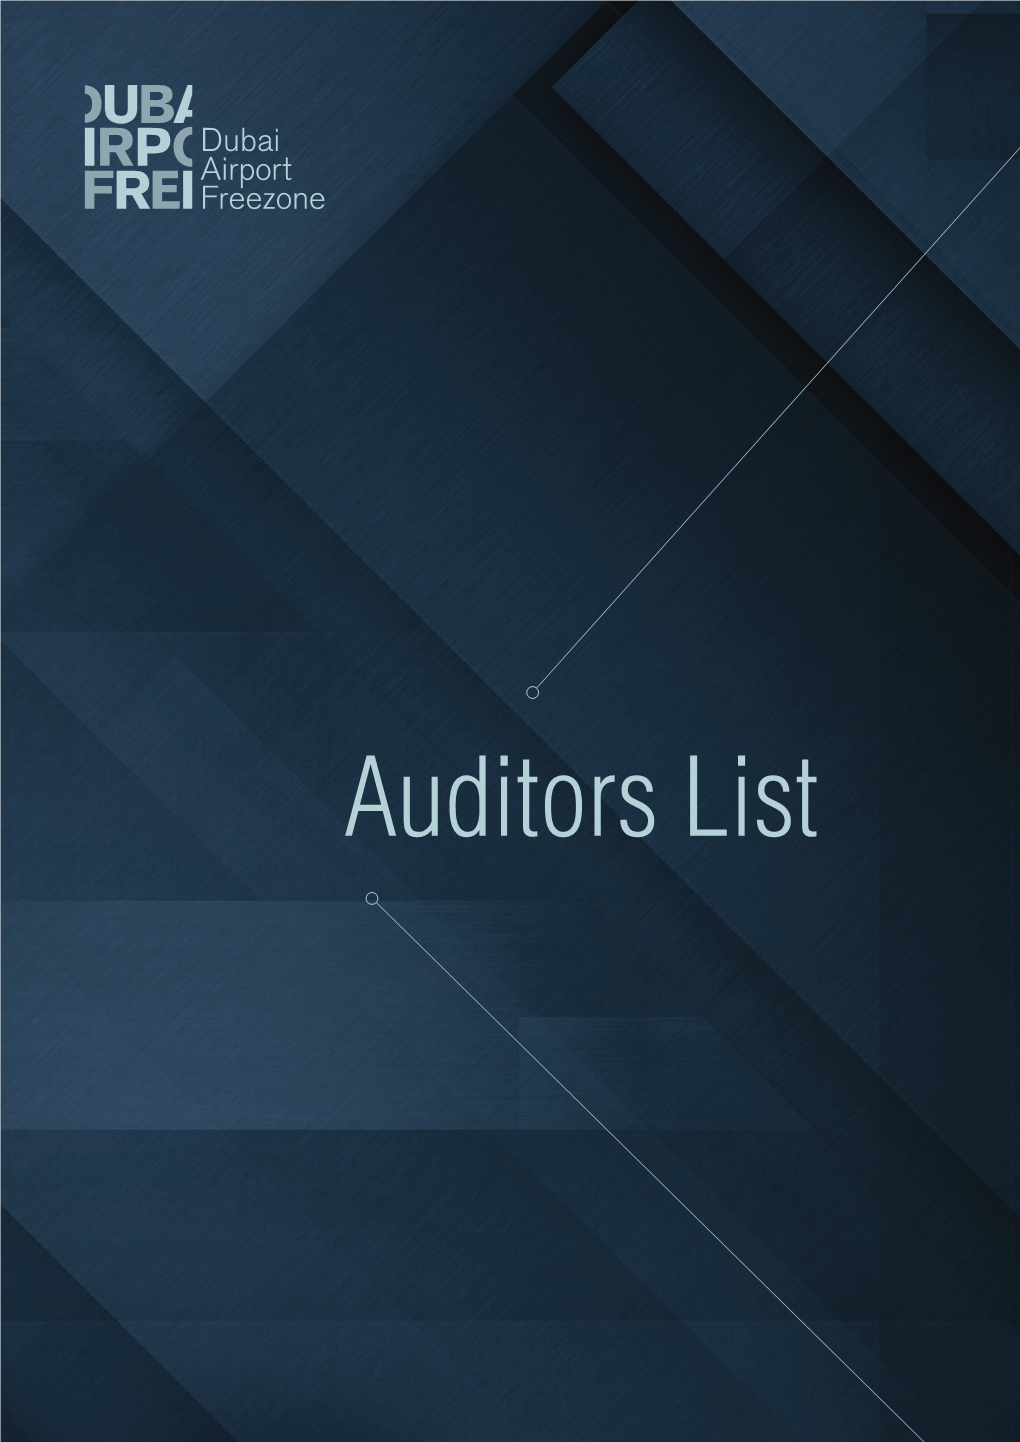 Auditors List Nade Dubai Airport Free Zone Dubai Airport Free Zone List of Audit Firms List of Audit Firms